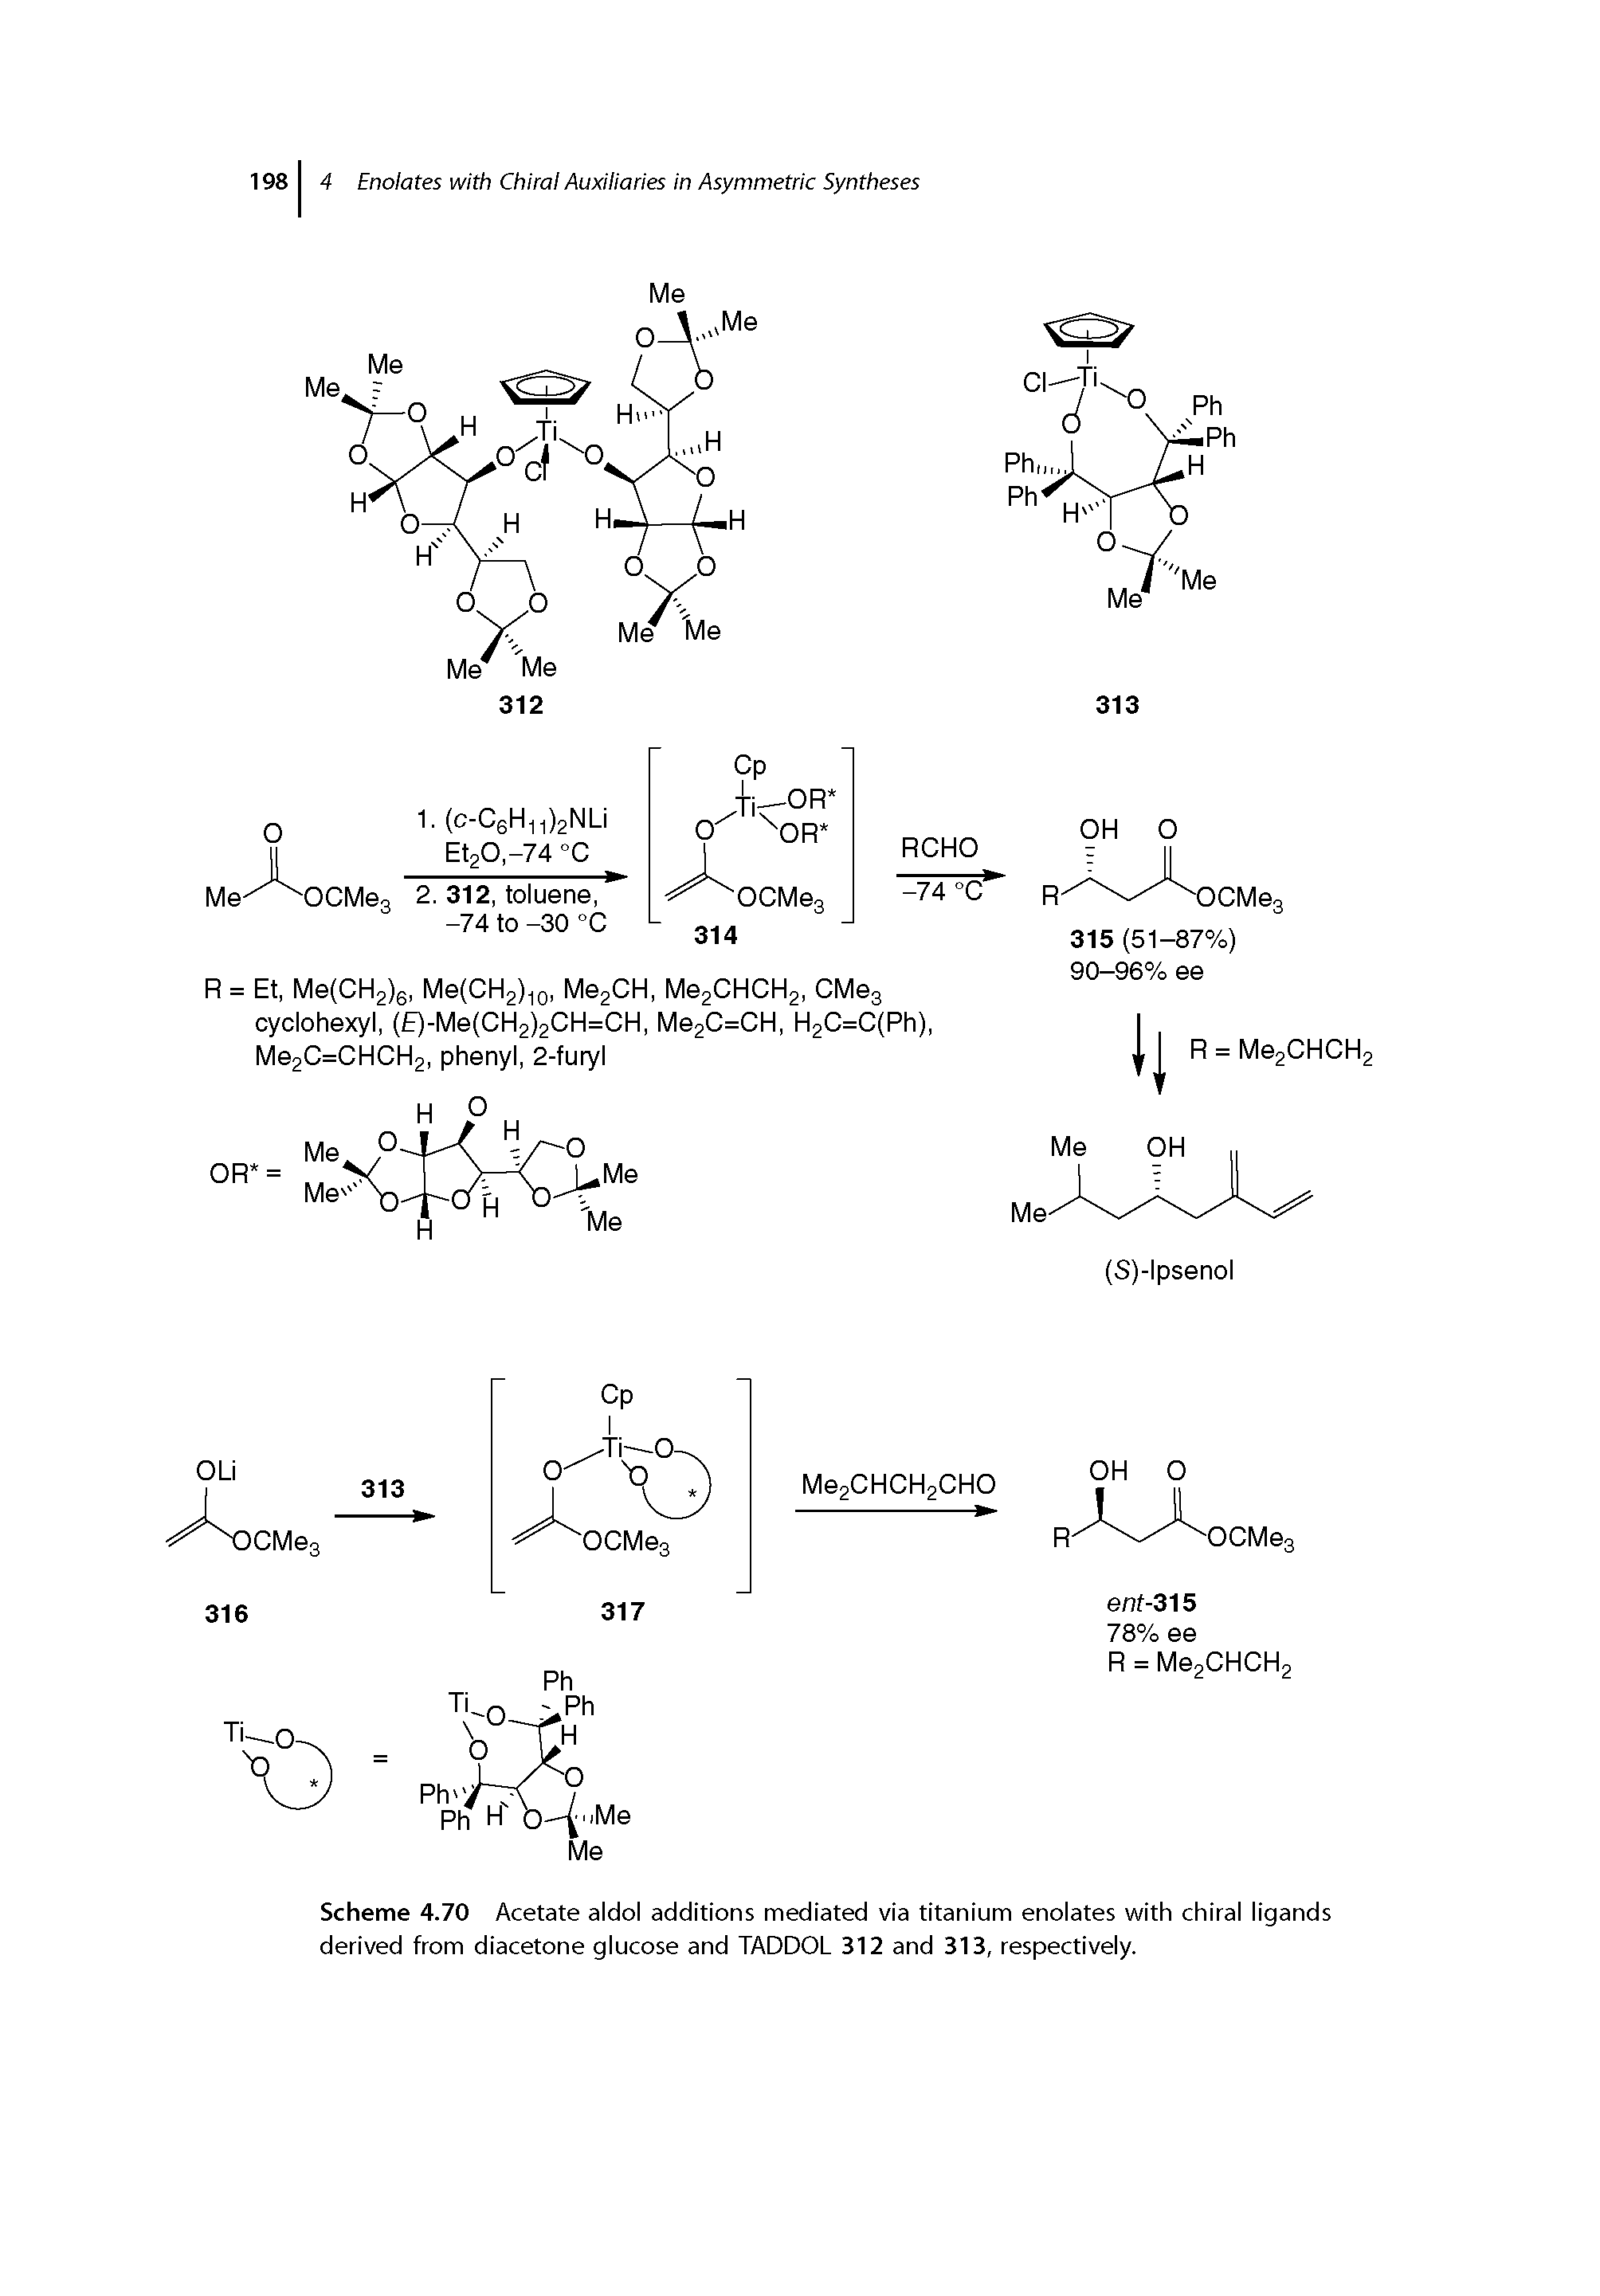 Scheme 4.70 Acetate aldol additions mediated via titanium enolates with chiral ligands derived from diacetone glucose and TADDOL 312 and 313, respectively.